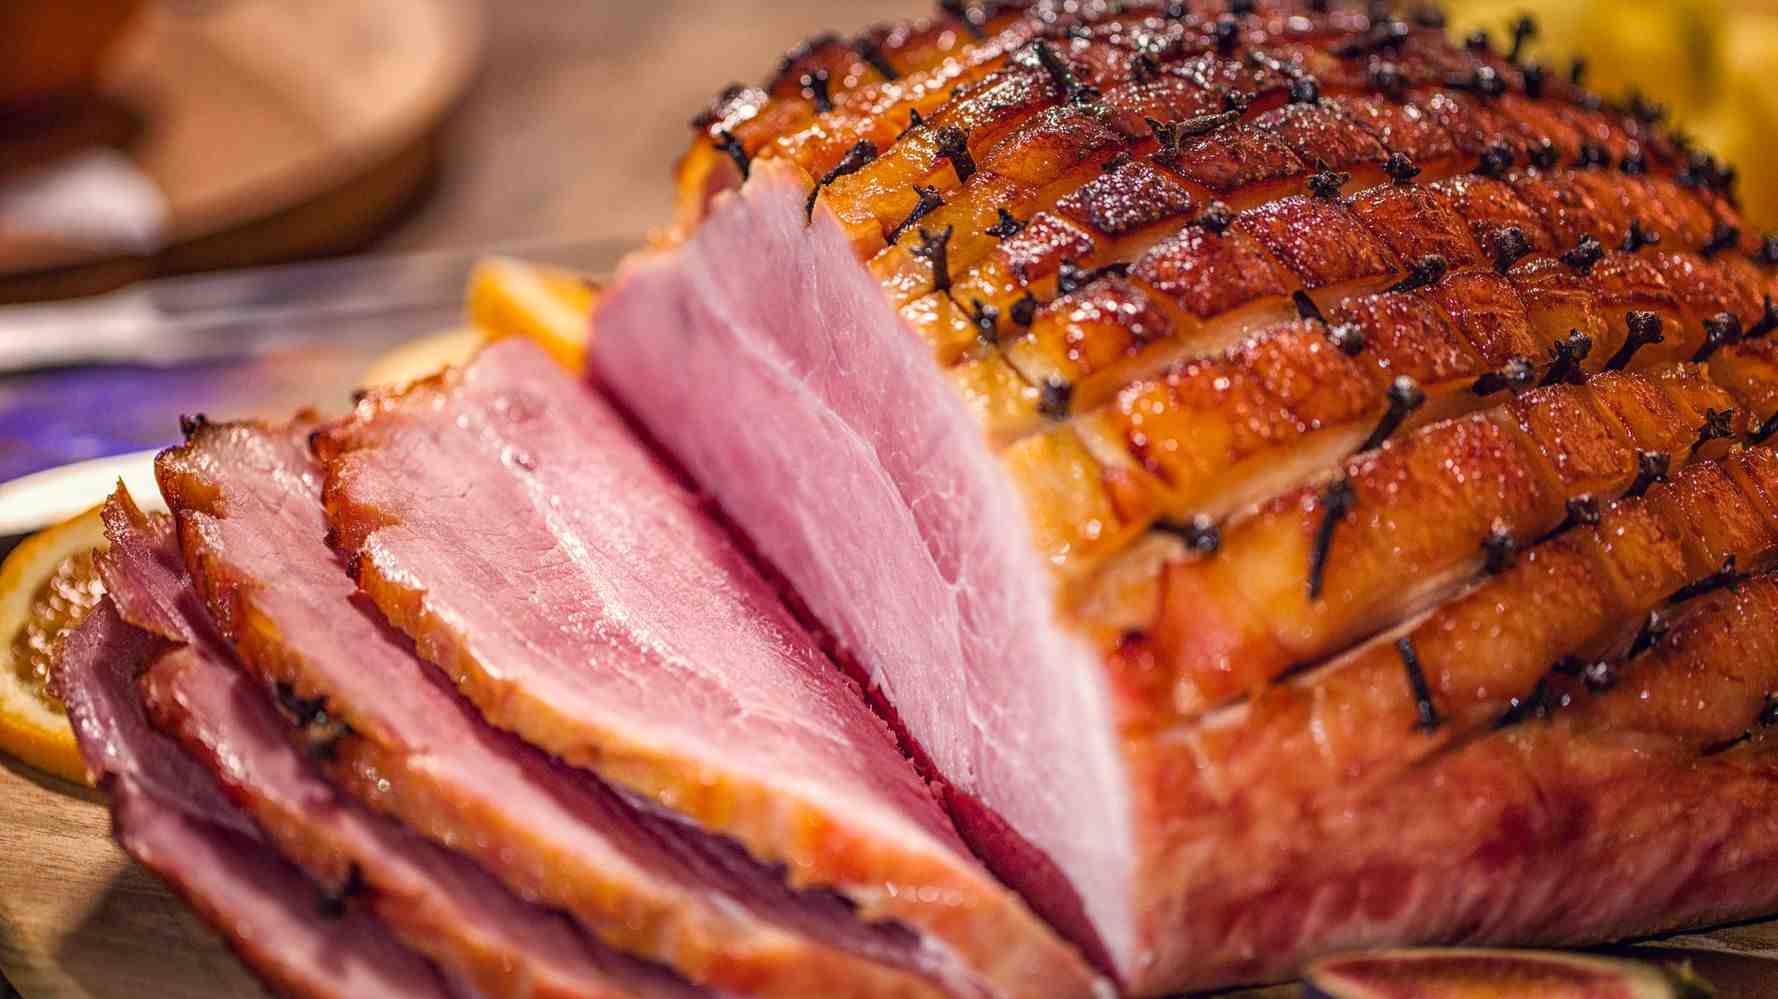 Why is ham good for you?